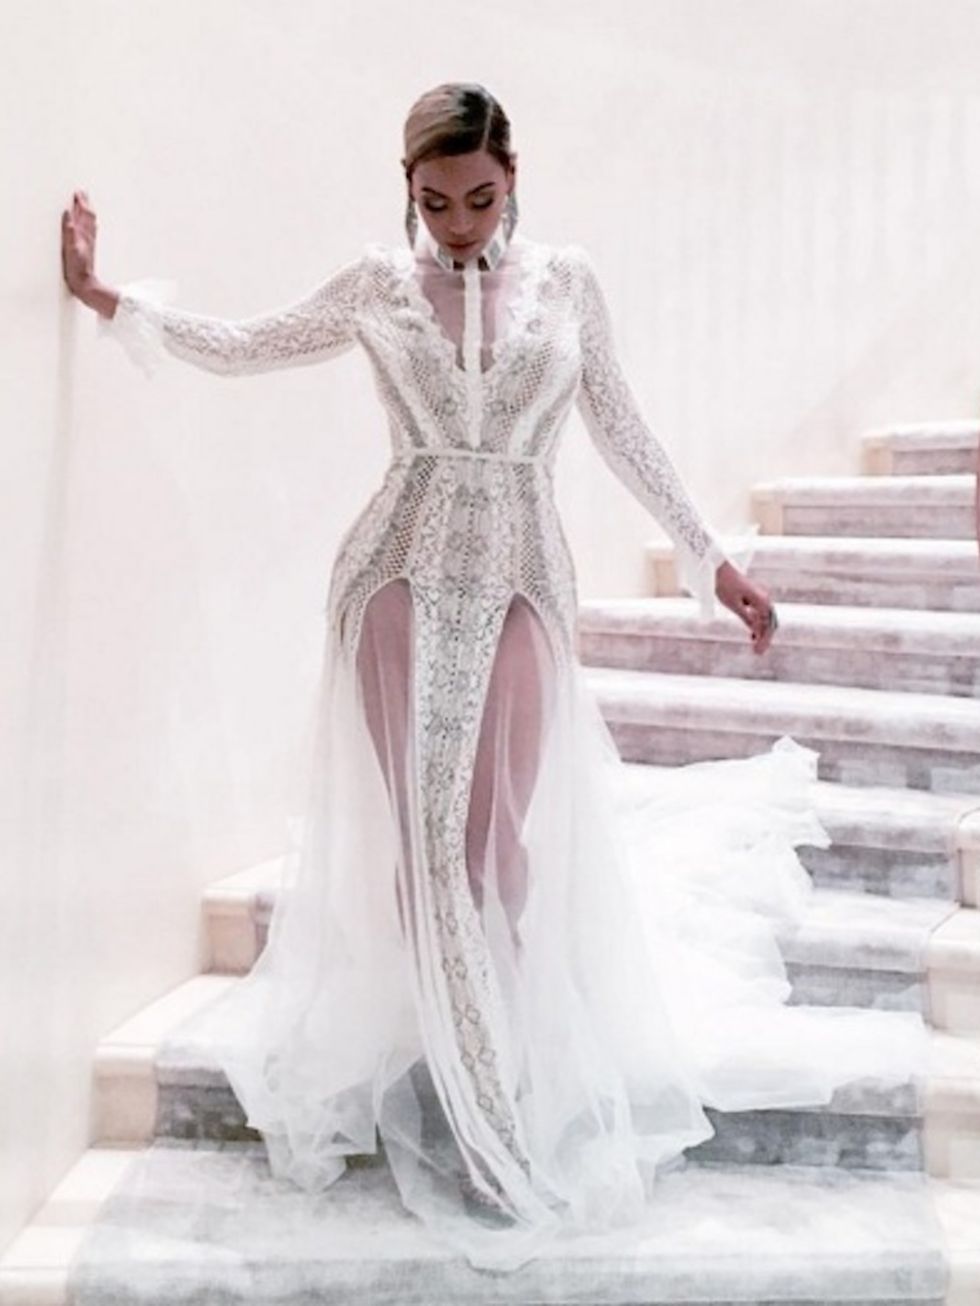 Wearing Inbal Dror for the 2016 Grammys